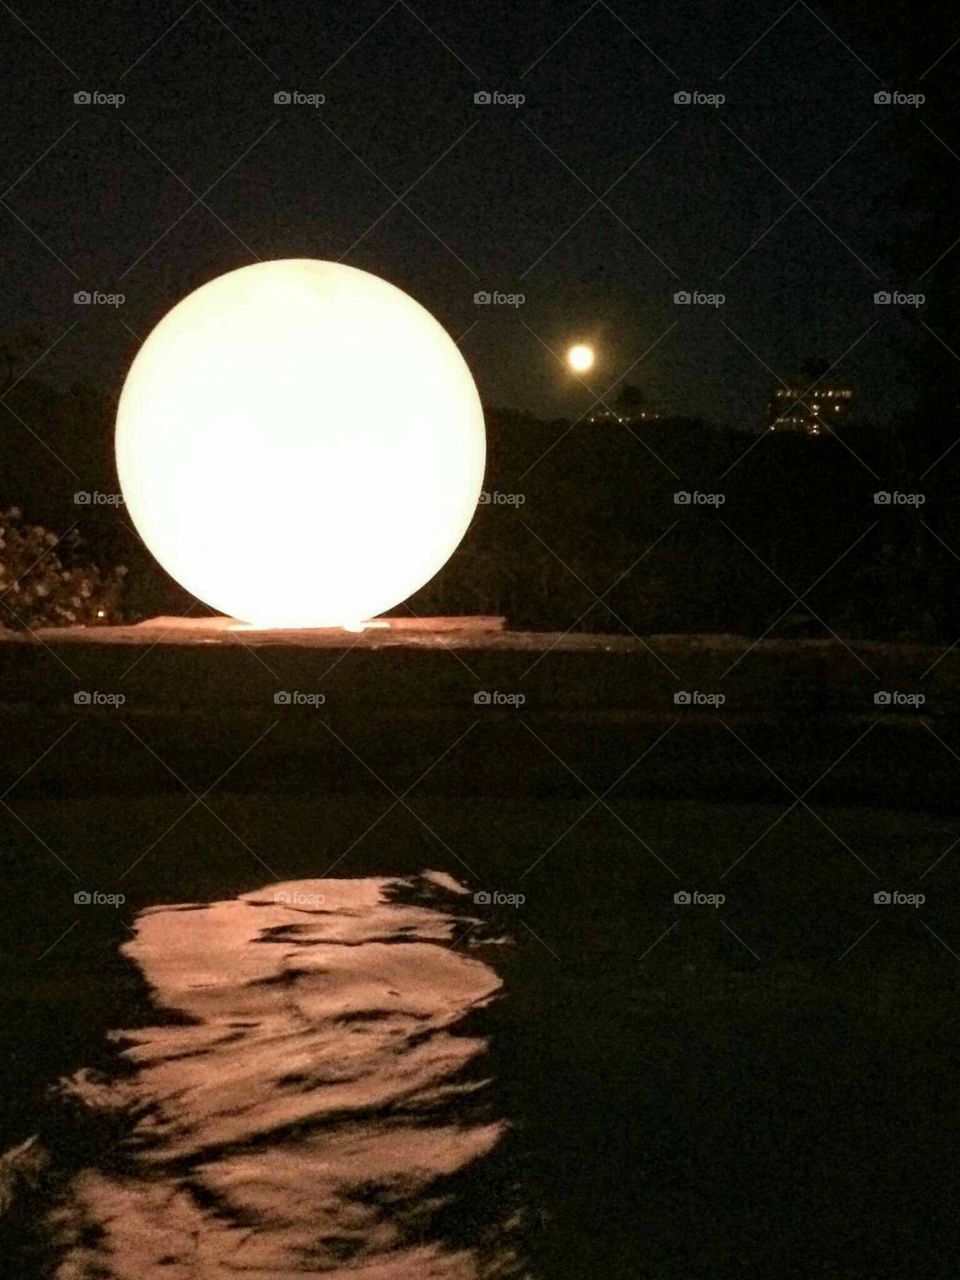 A big round shapped light reflecting in the water of a hot tub with the full moon in the background